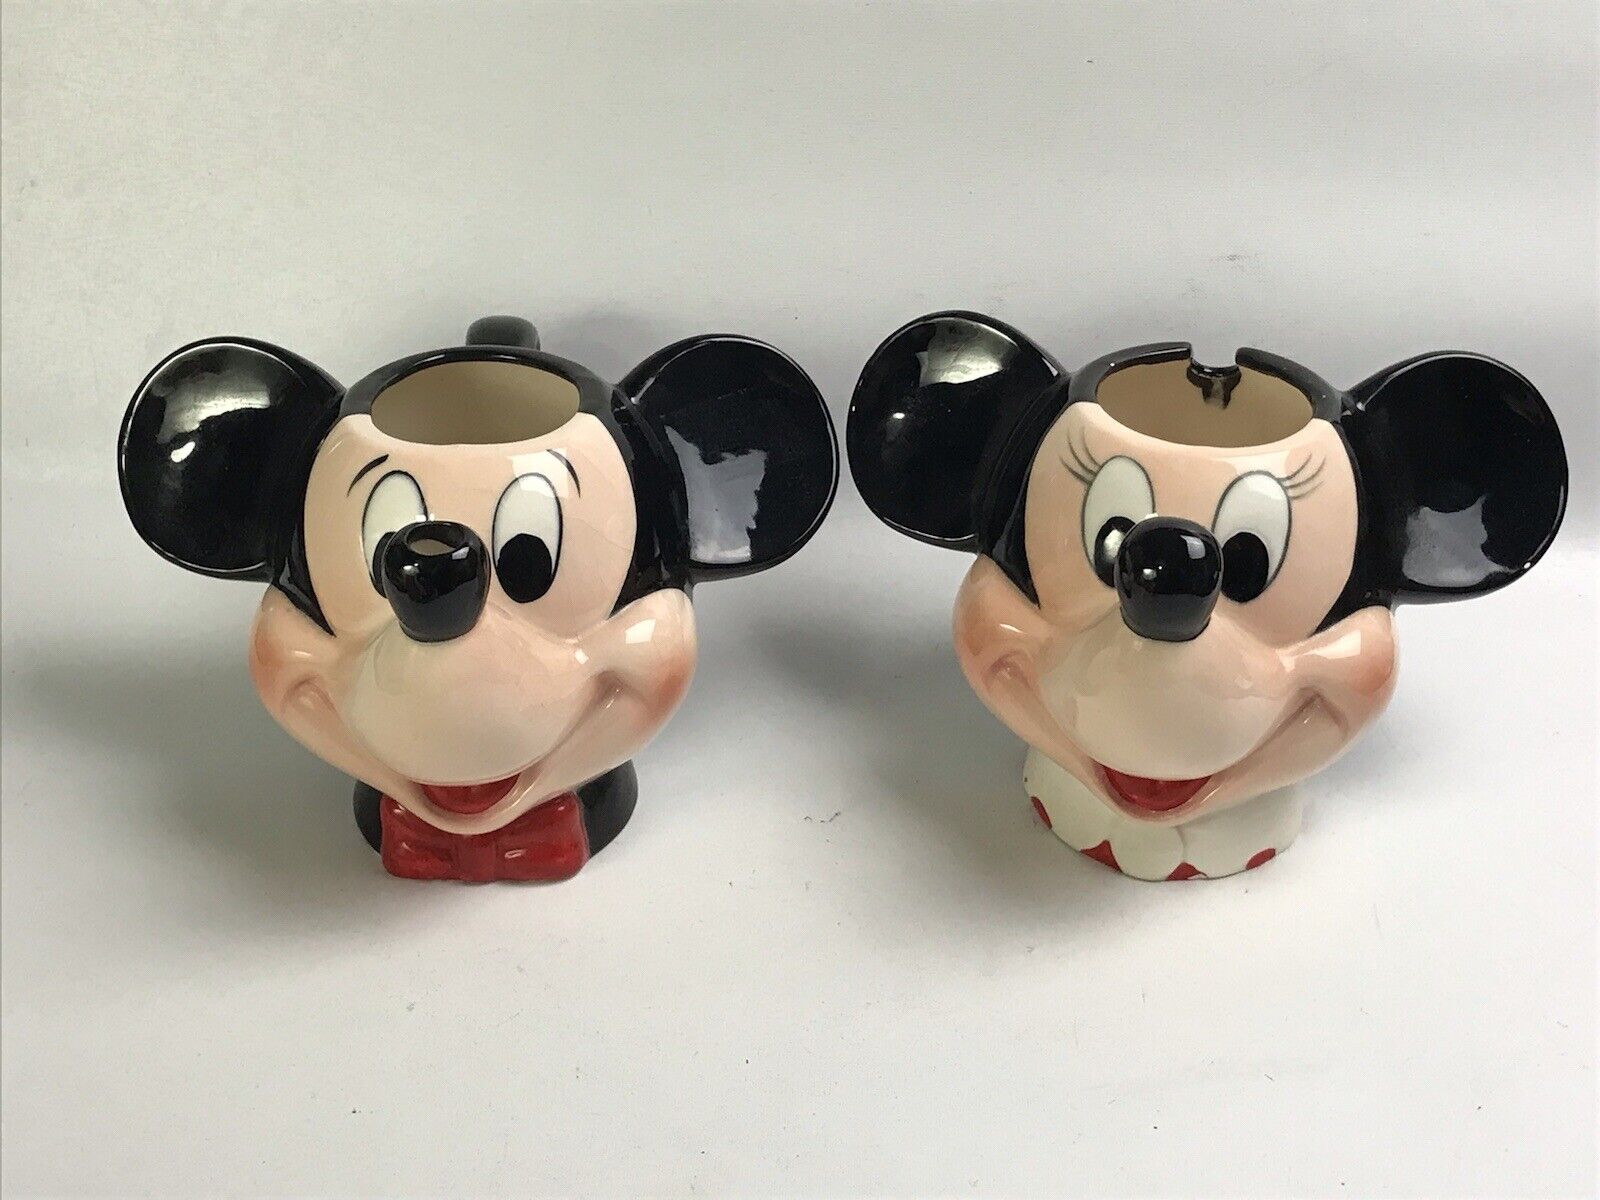 APPLAUSE INC. DISNEY MICKEY / MINNIE MOUSE TEAPOT Or CREAM AND SUGAR Missing Lid